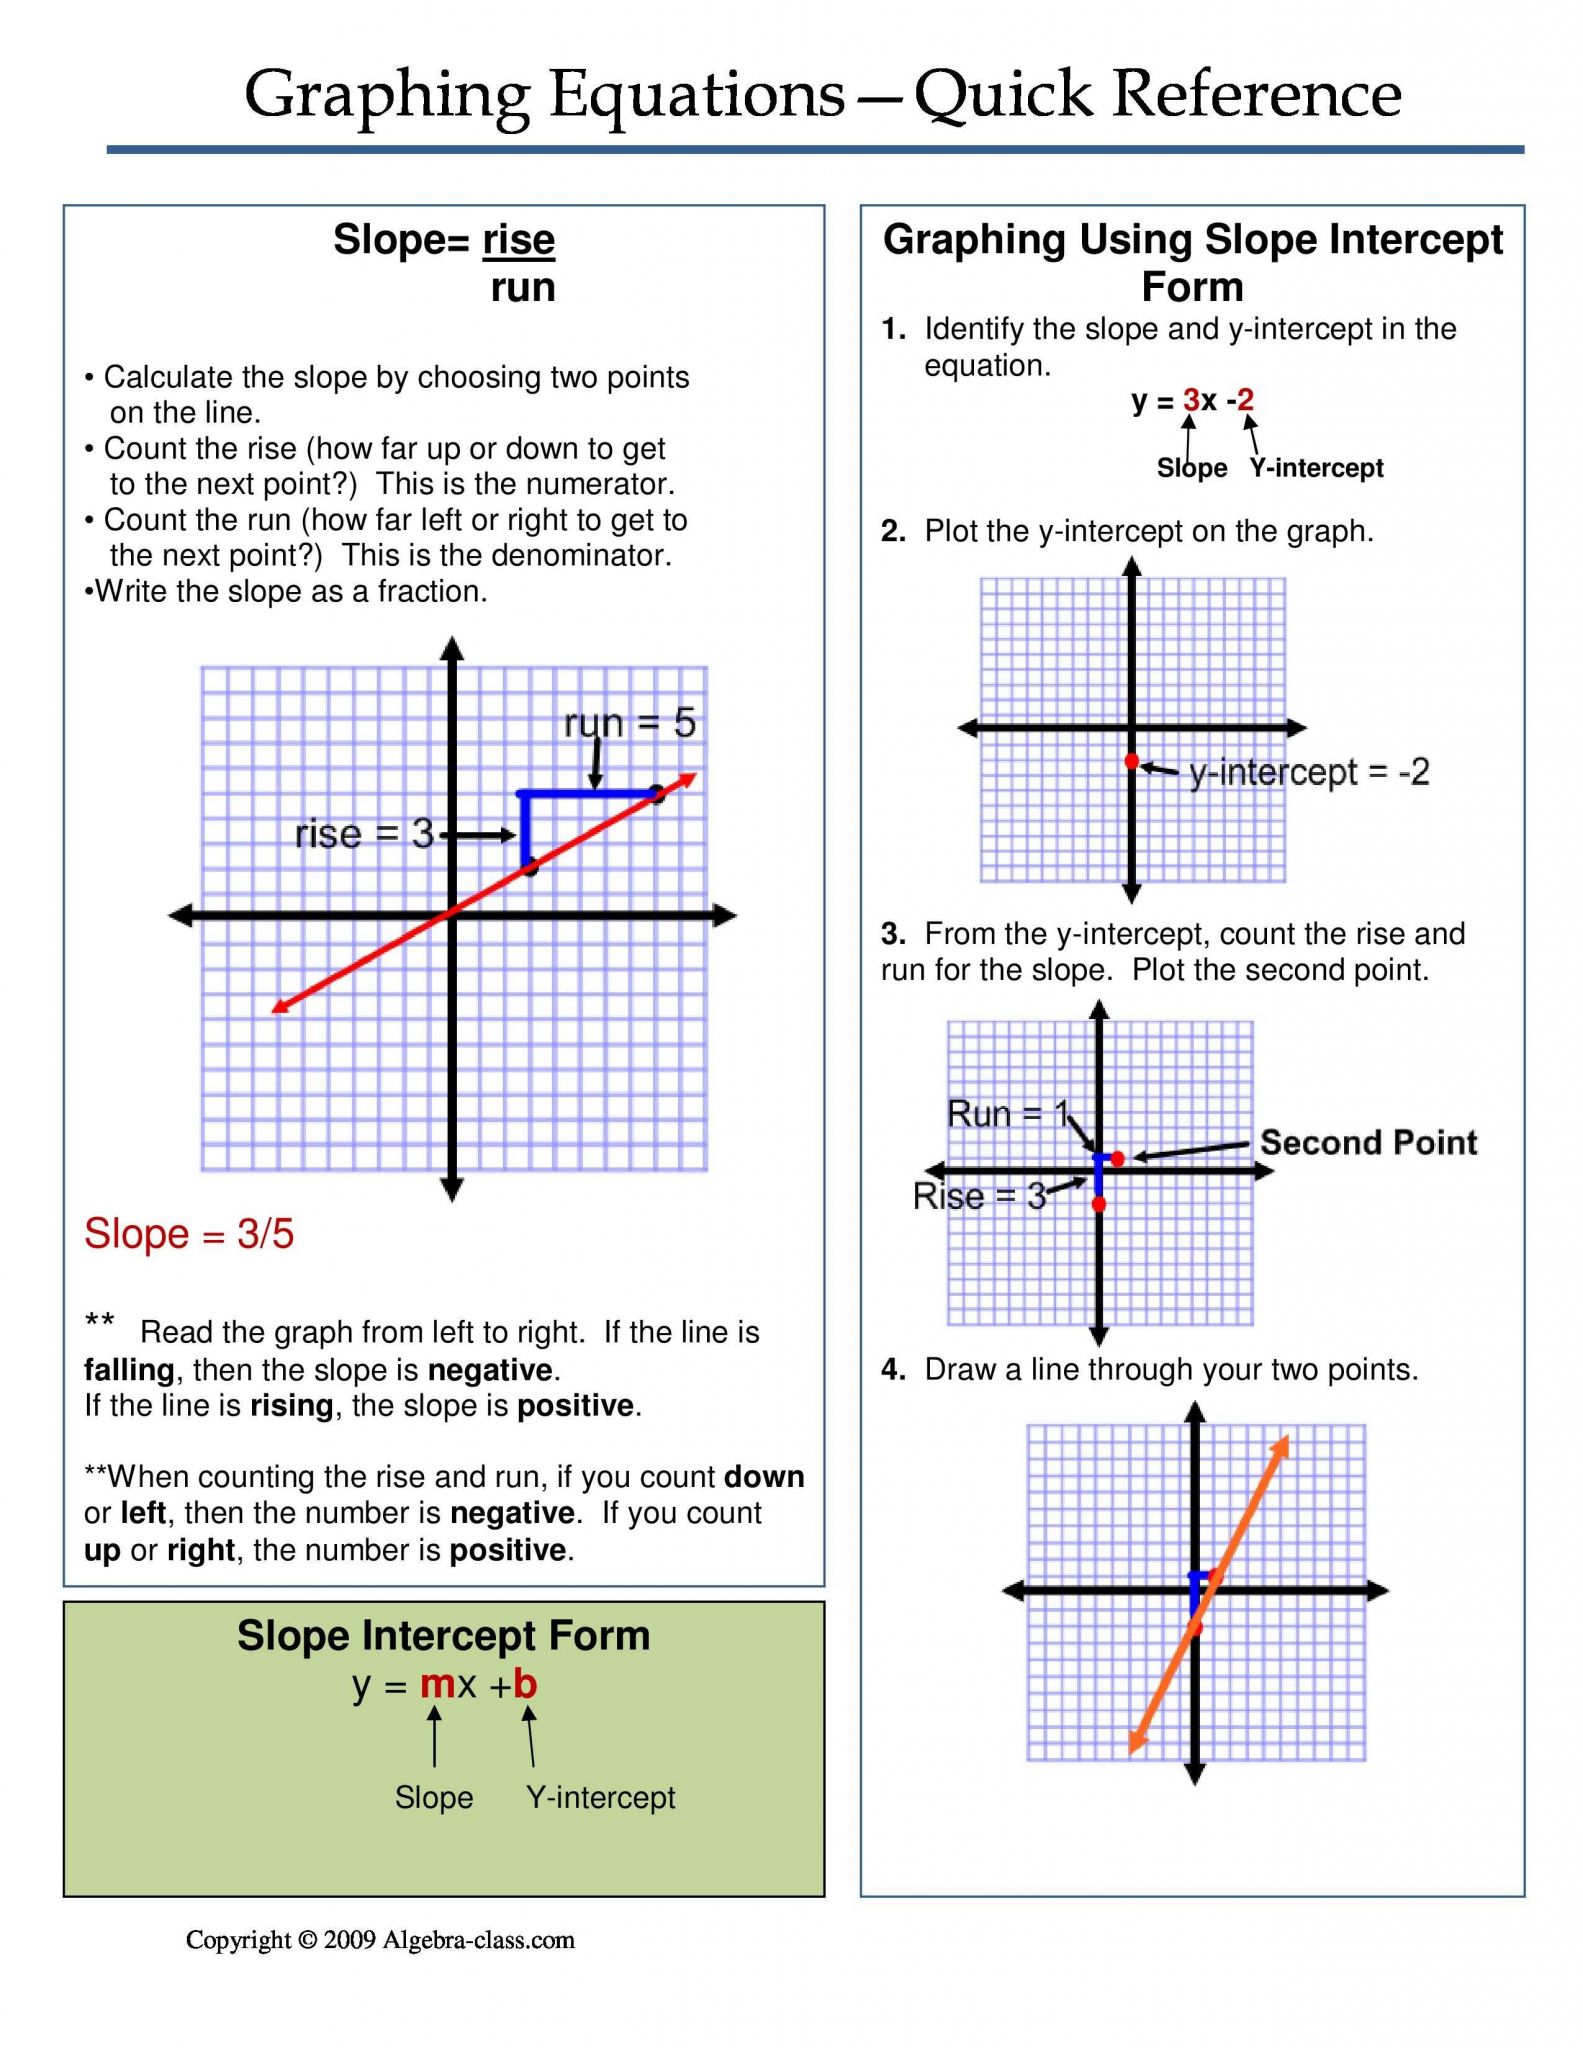 6th Grade Inequalities Worksheet Along with E Page Notes Worksheet for the Graphing Equations Unit